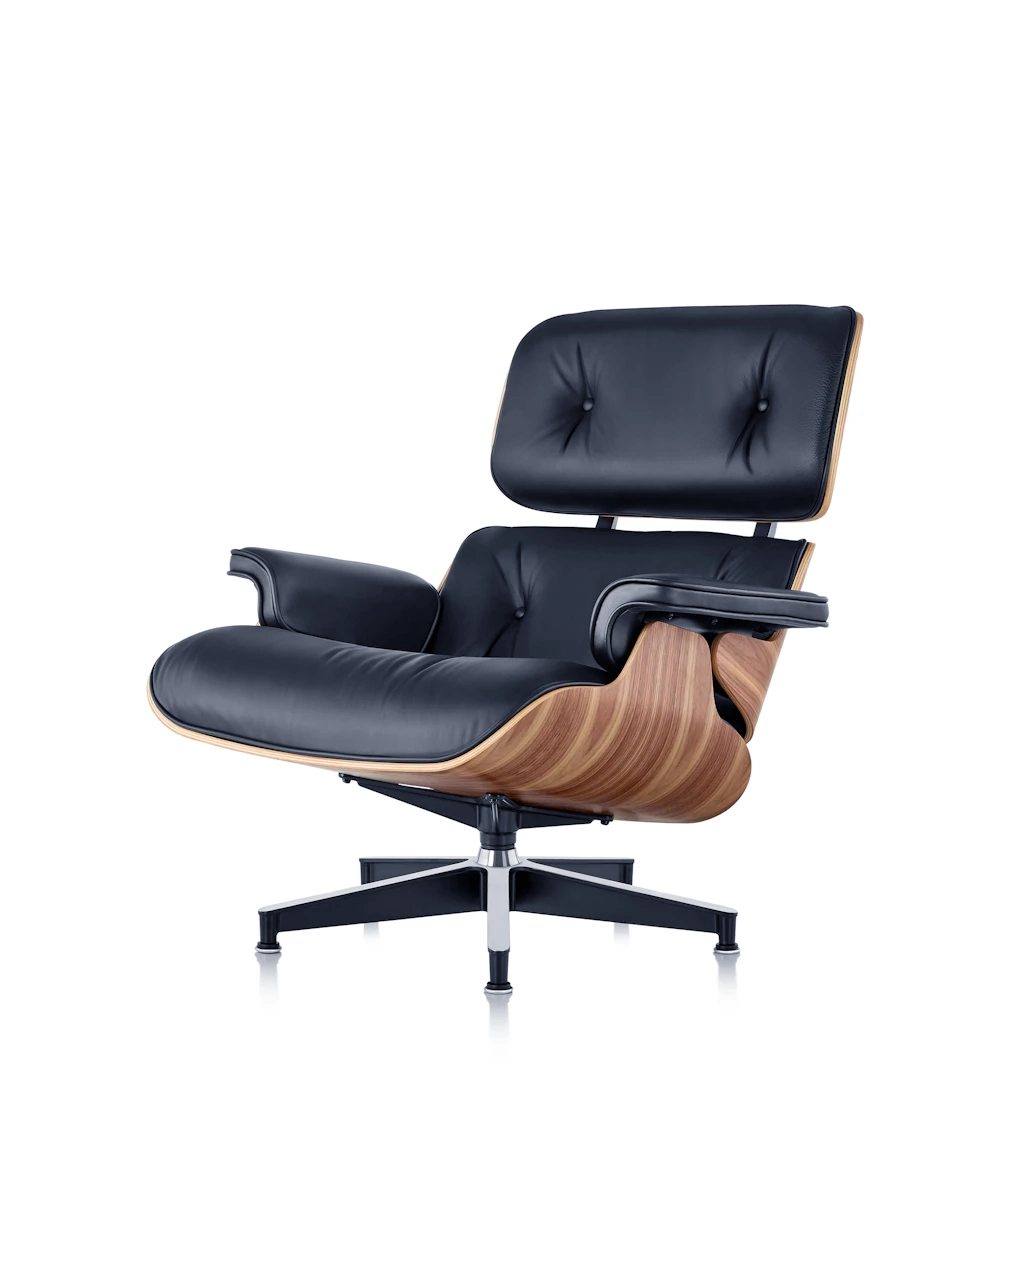 Eames lounge chair tall at WorkArena